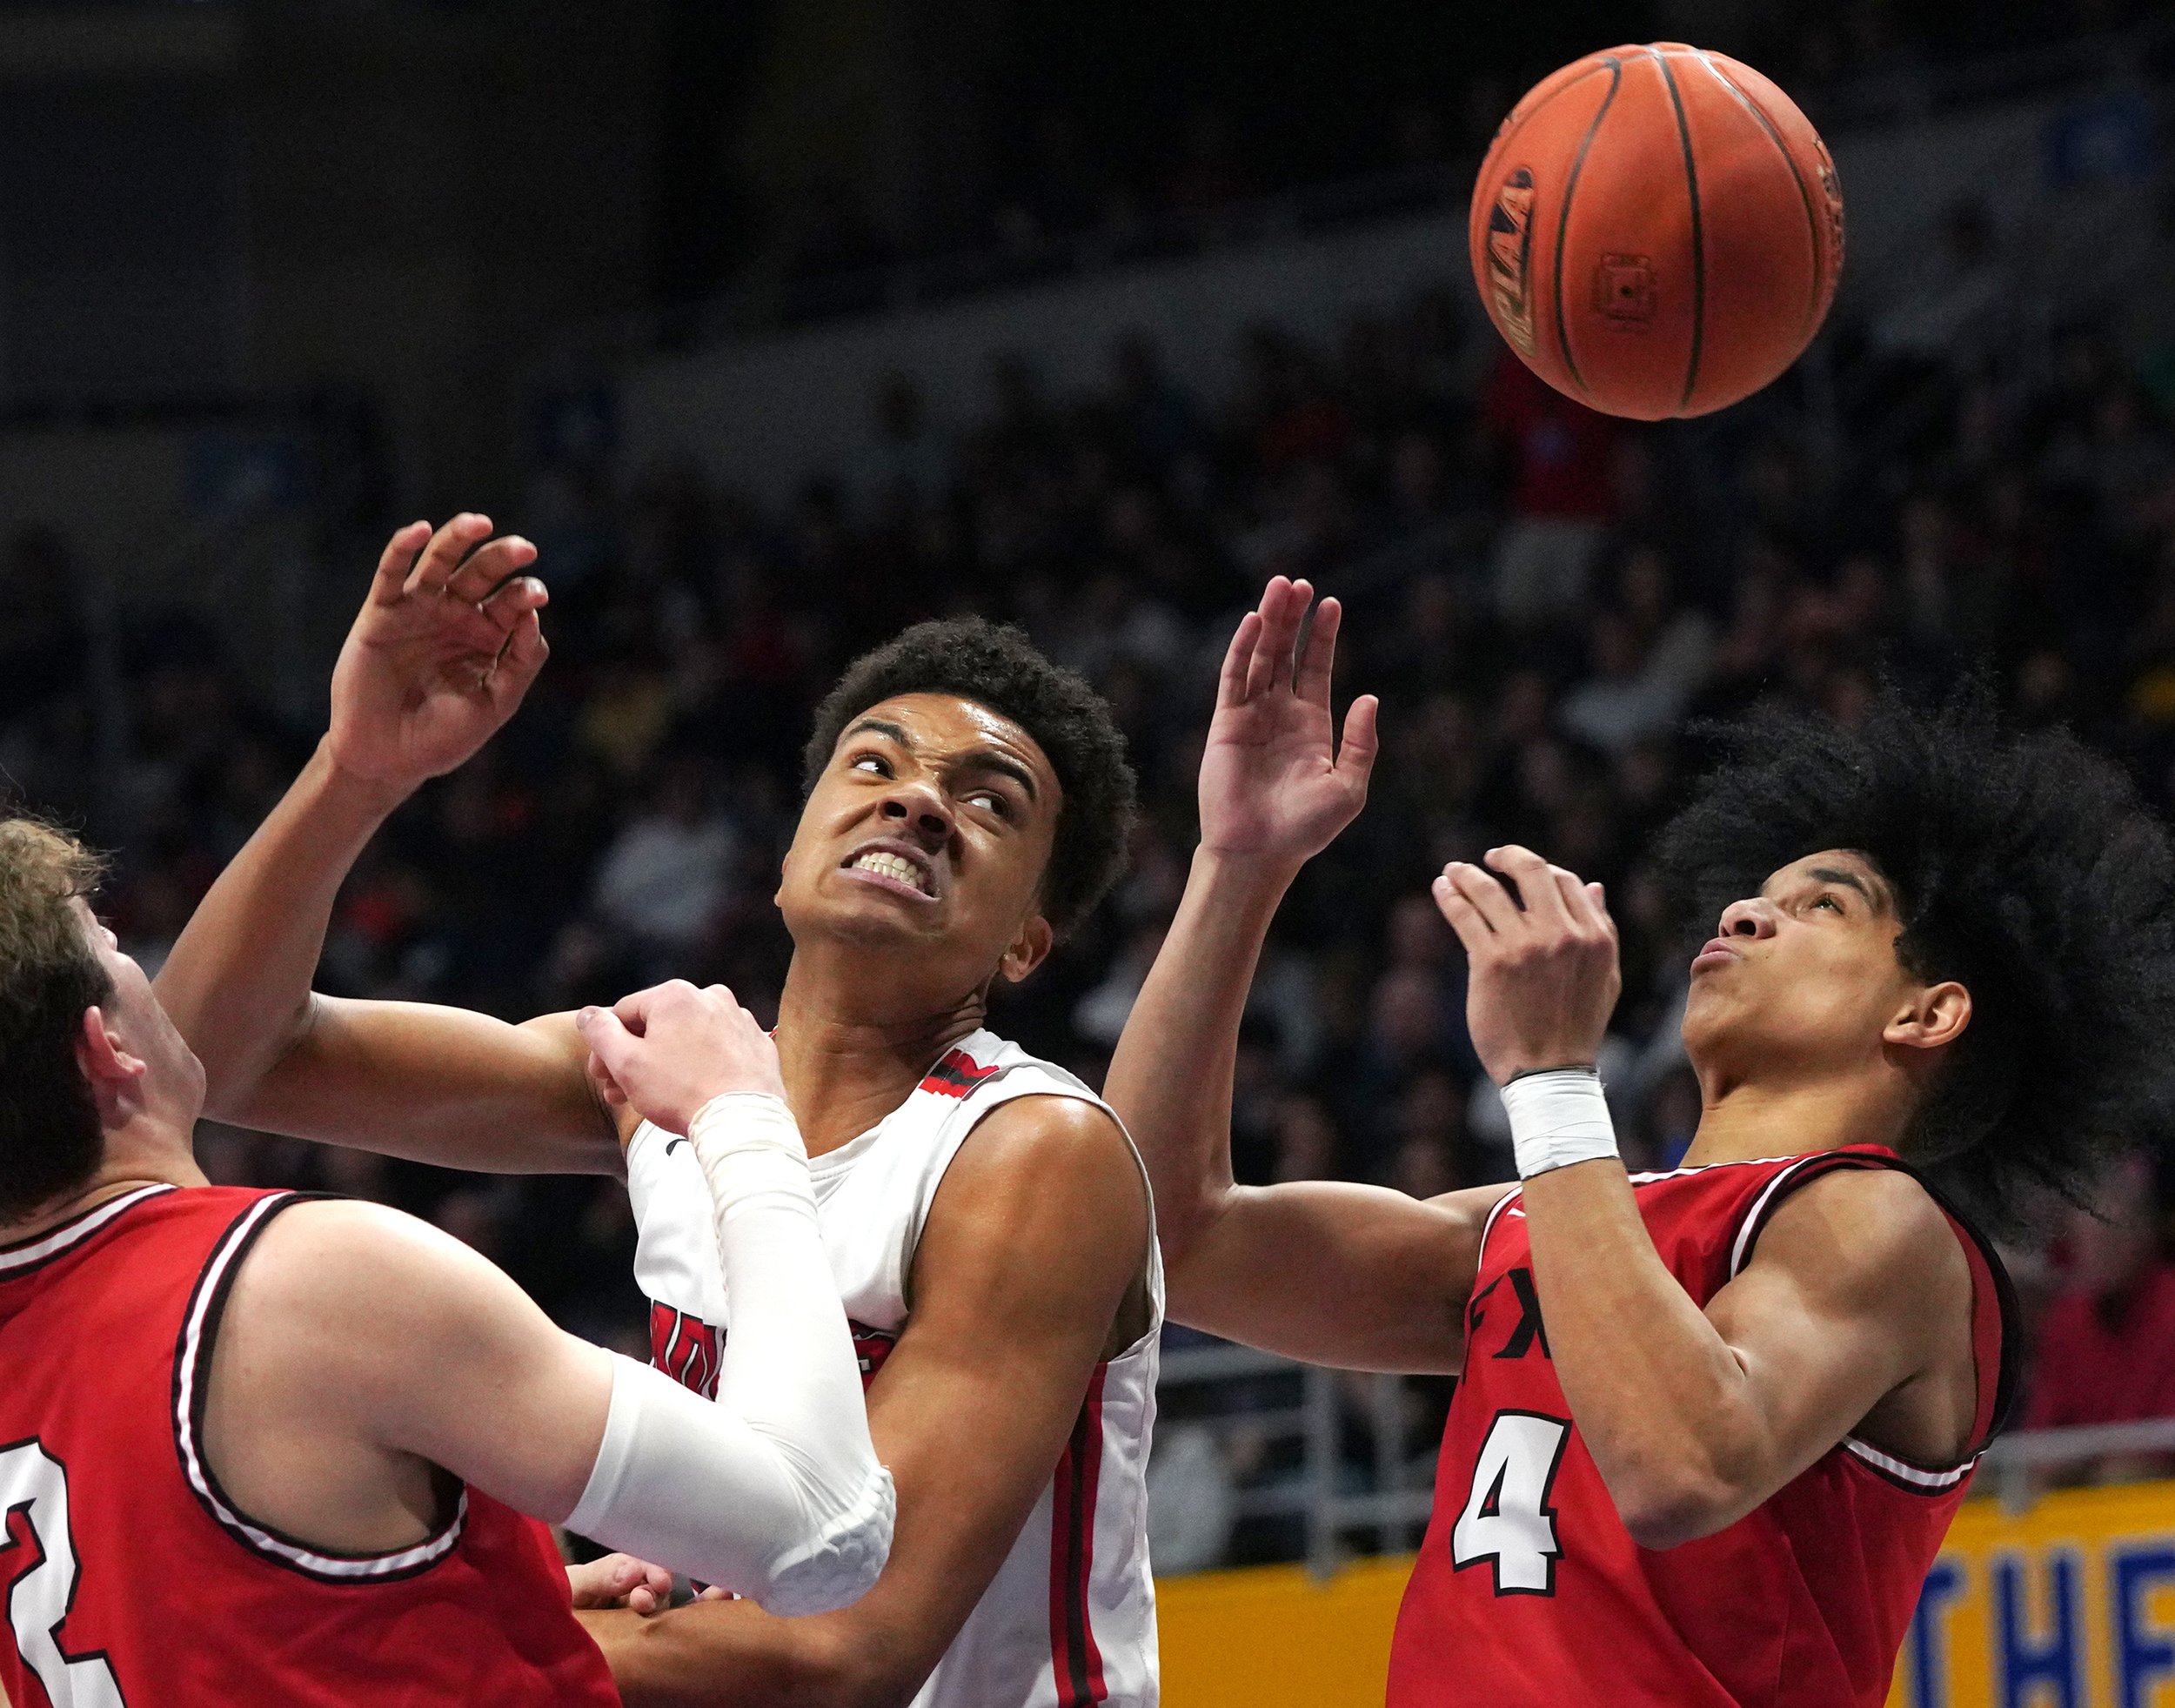  North Hills High School’s Royce Parham and Fox Chapel High School’s Jeff Moorefield-Brown watch a rebound on Saturday, March 5, 2022, at the Petersen Events Center in Pittsburgh’s Oakland. Fox Chapel won 43-36. (Emily Matthews/Post-Gazette)  